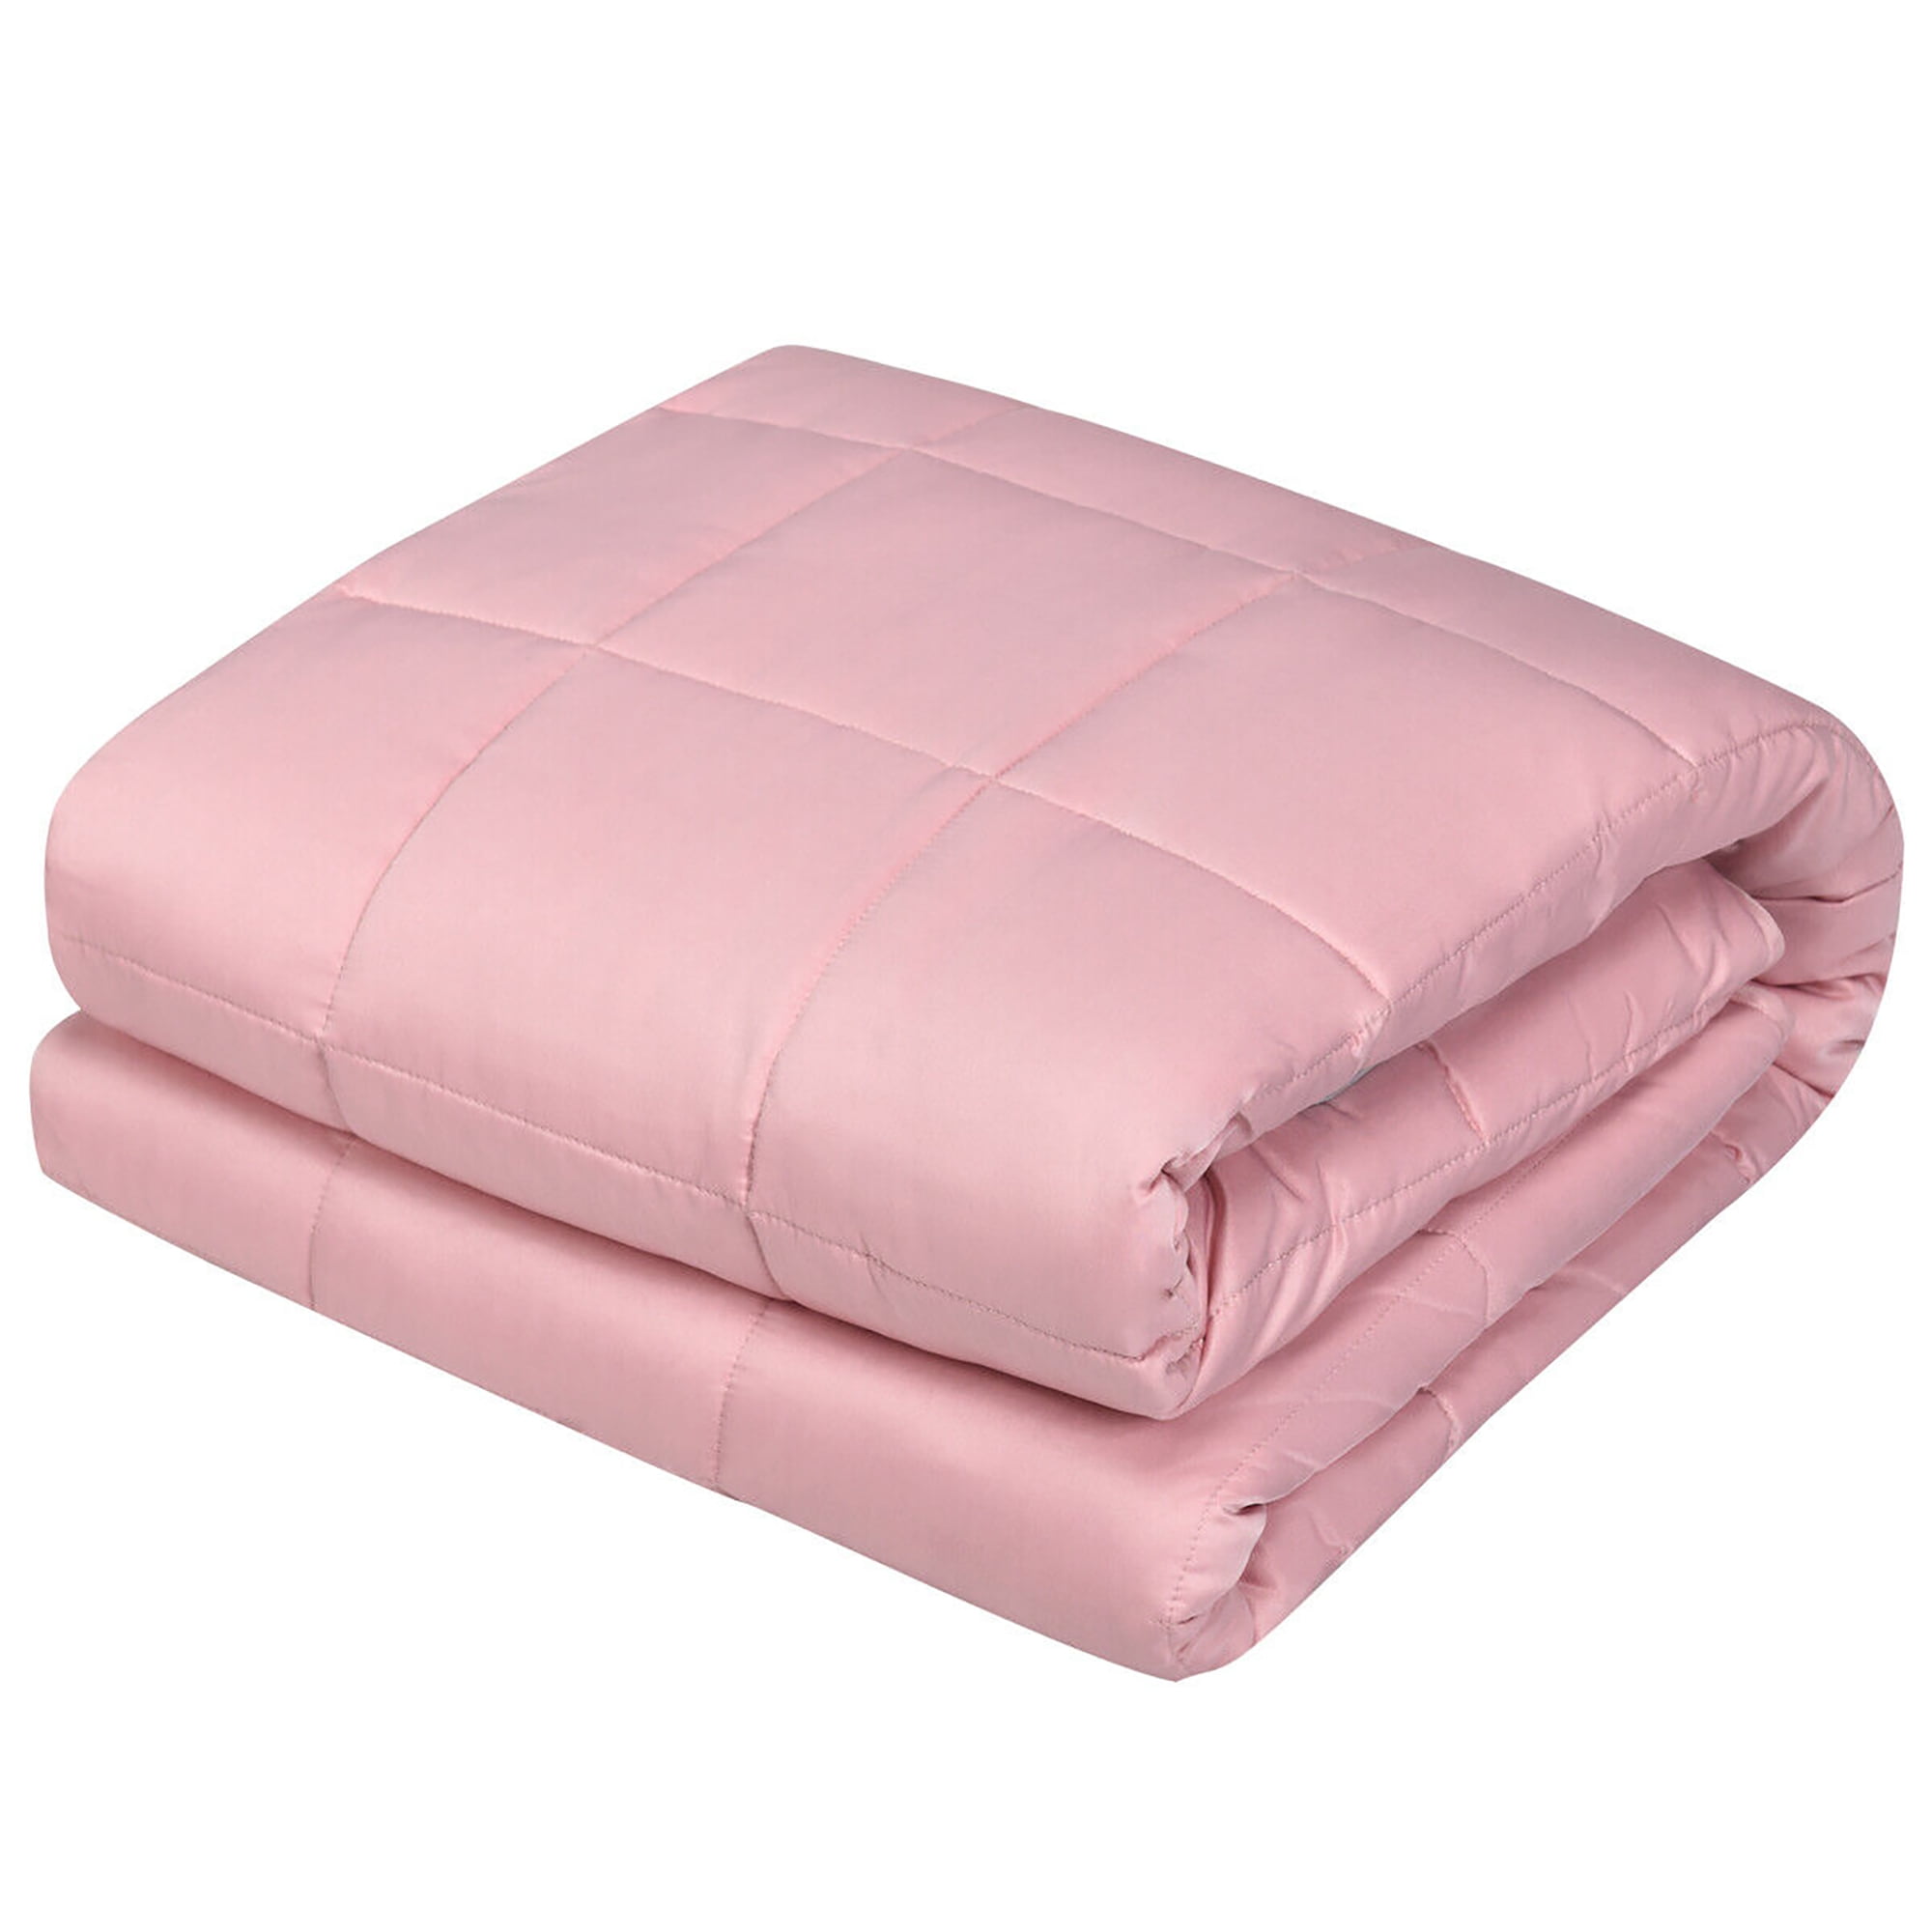 Costway 20lbs Premium Cooling Heavy Weighted Blanket Soft Fabric